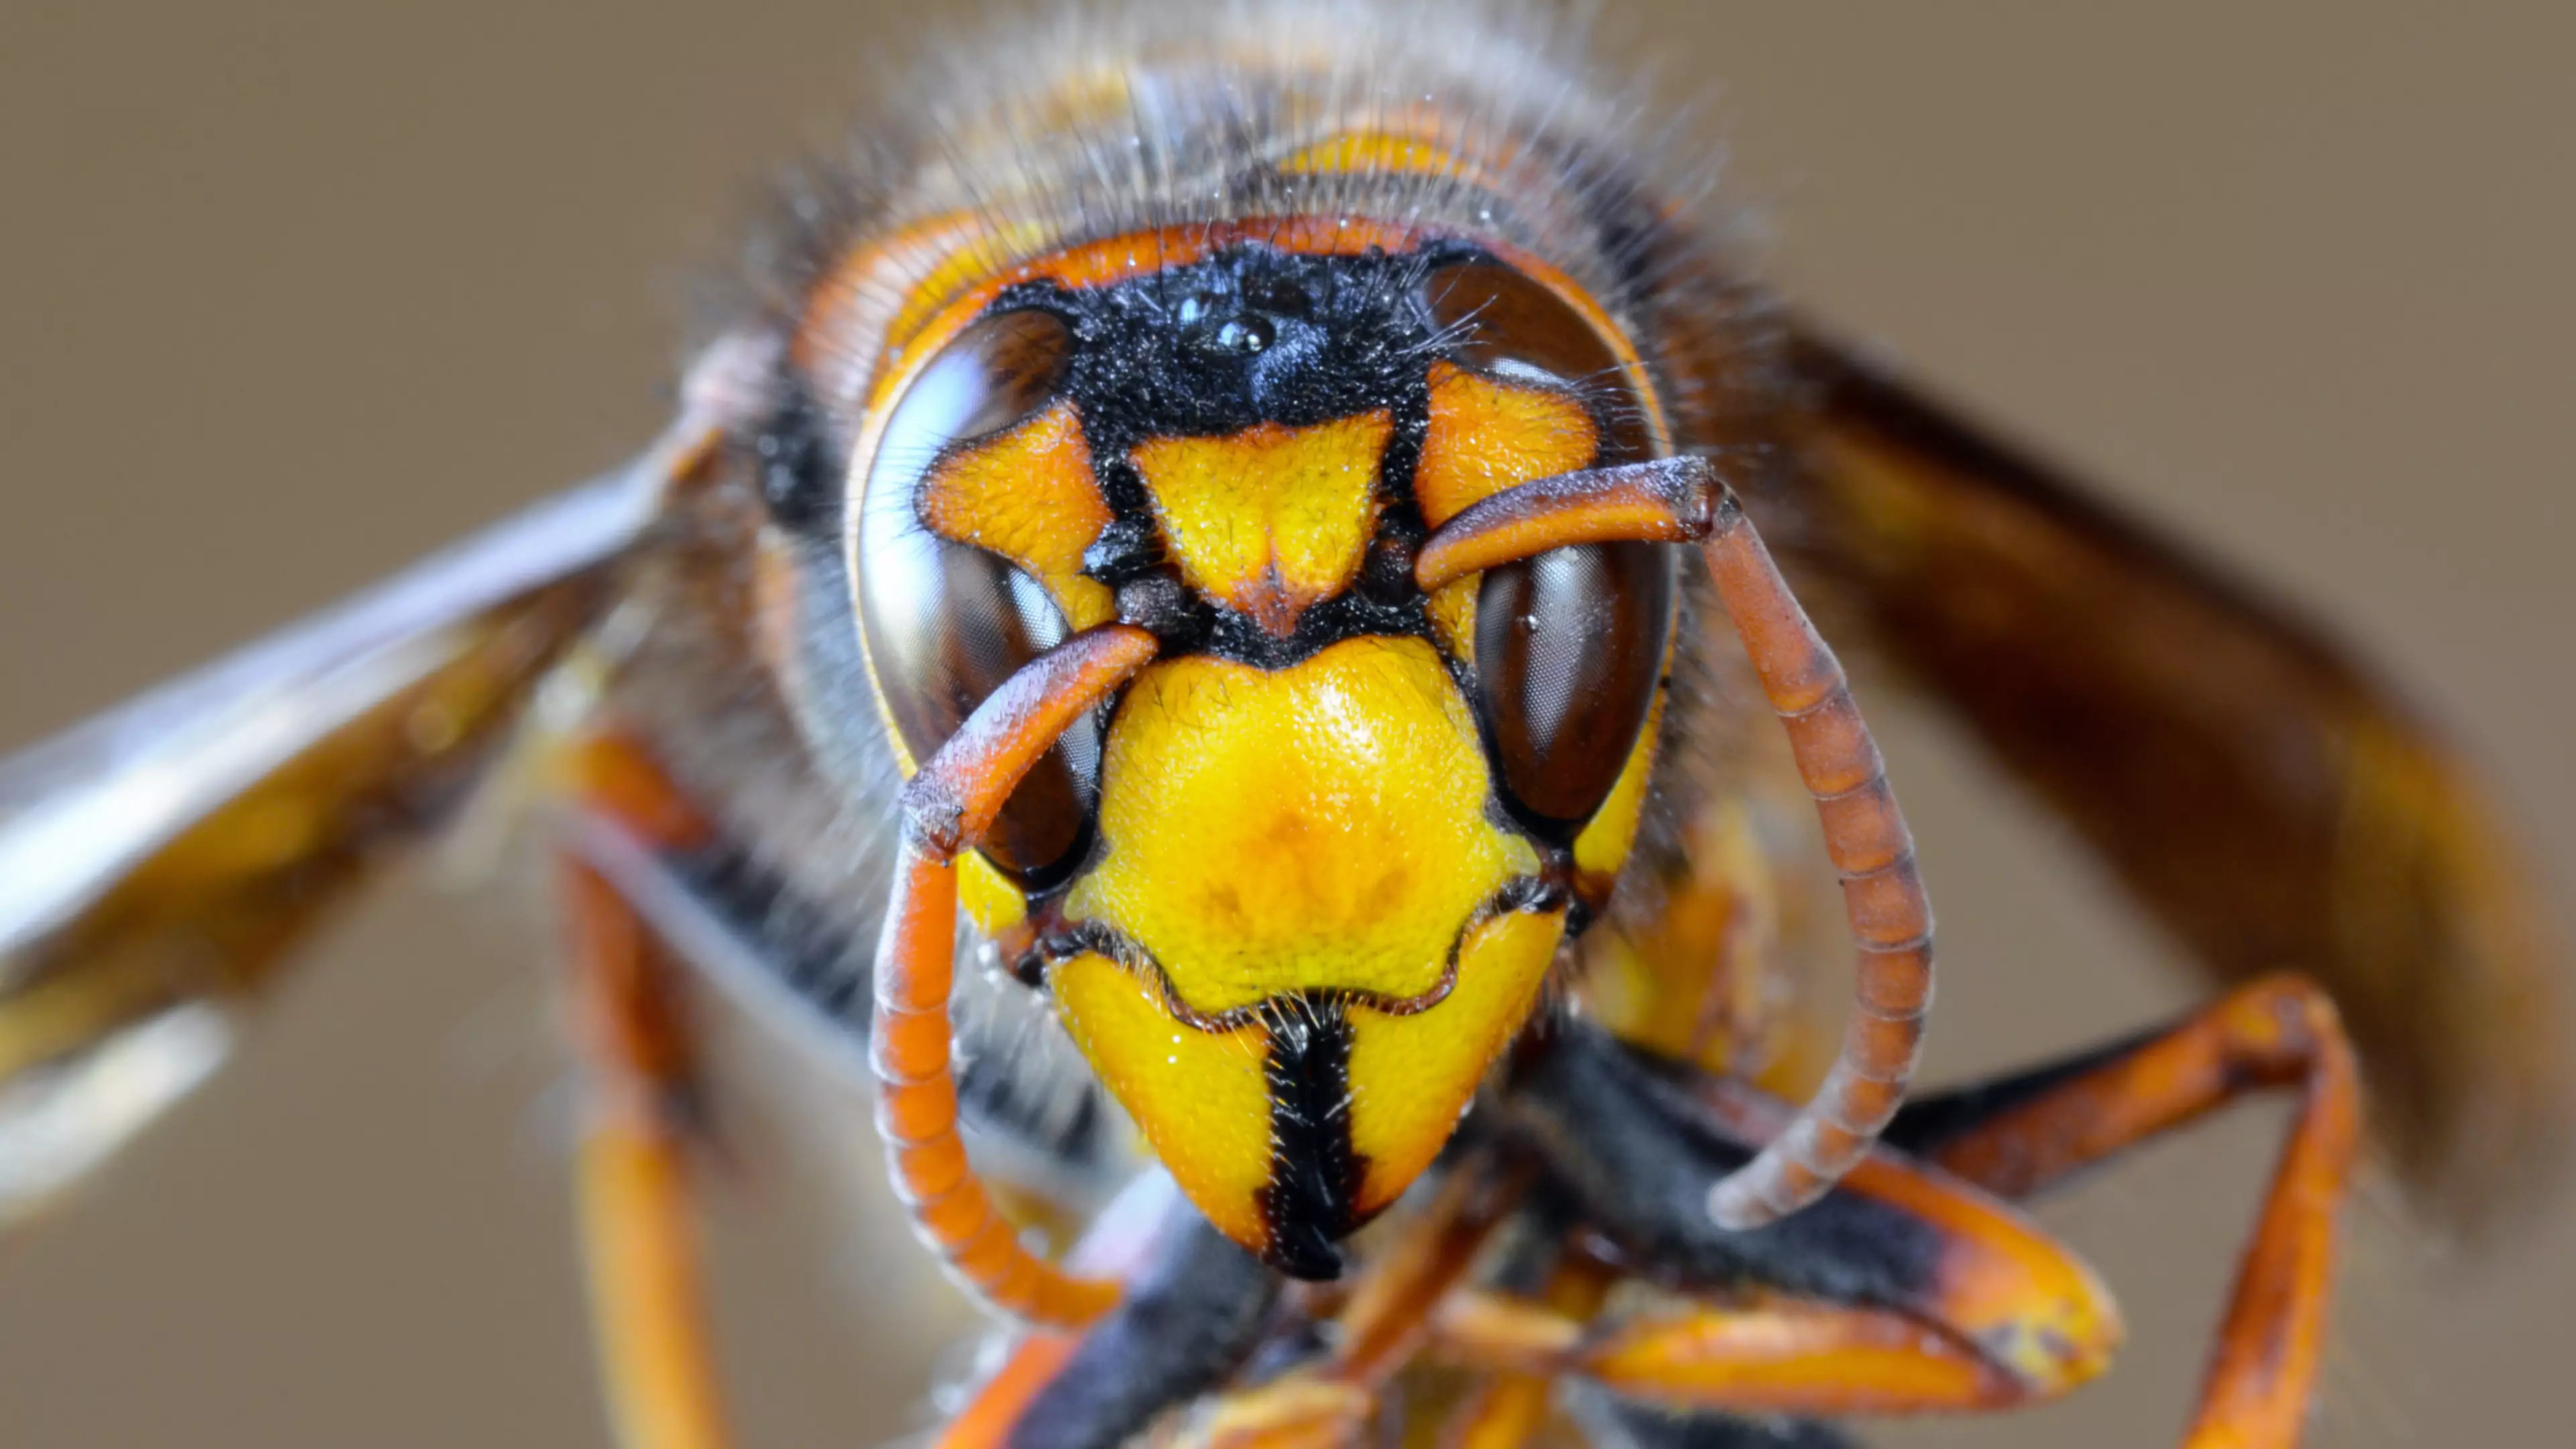 Steak And Ale Could Be Used To Stop Asian 'Murder' Hornets Invading British Isles